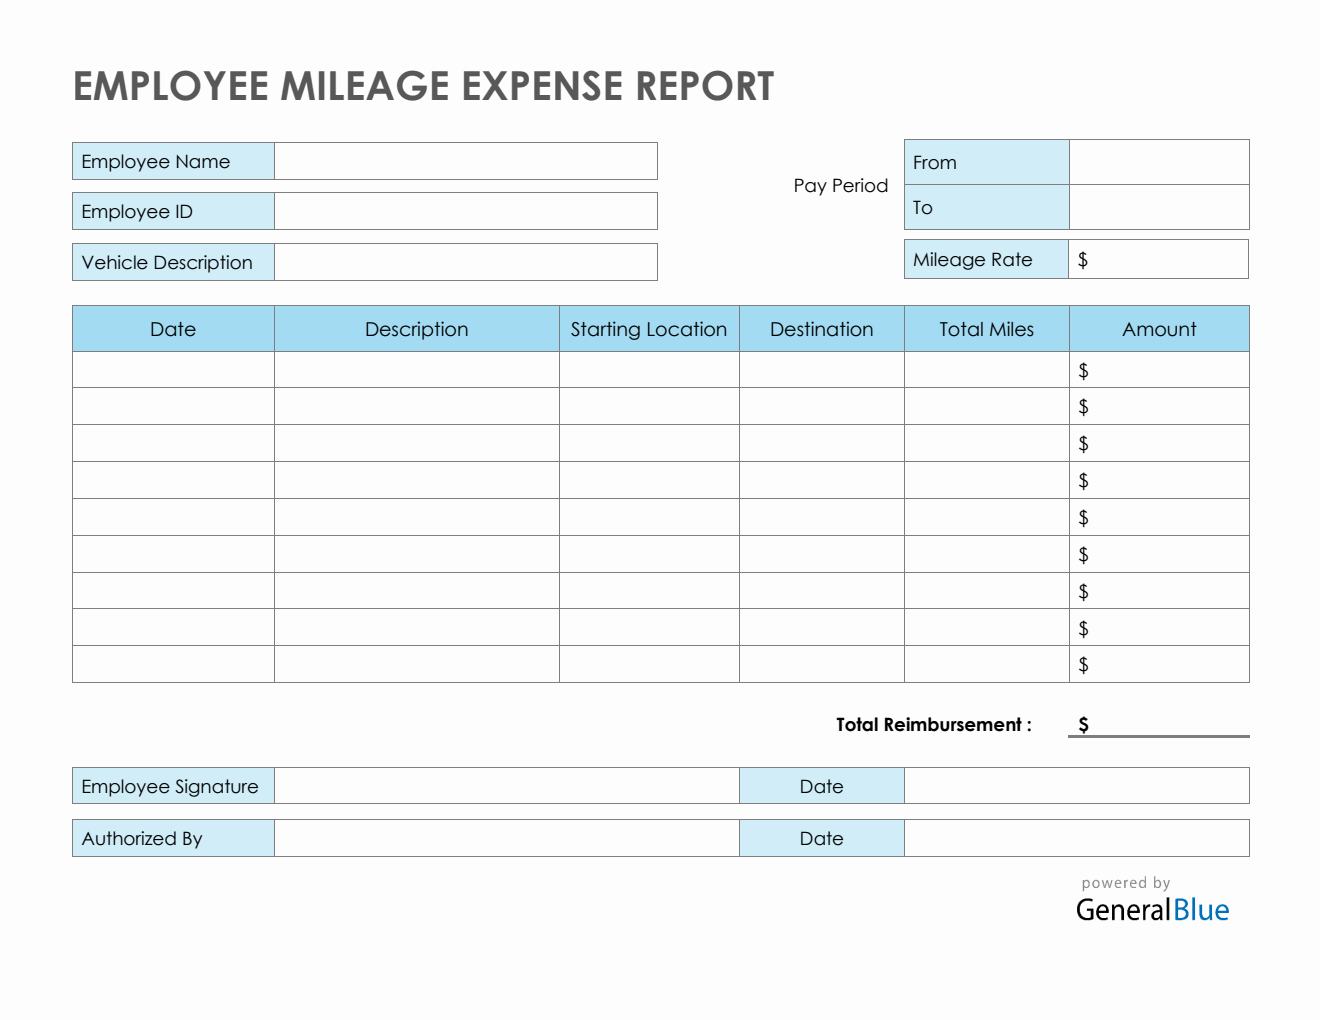 Employee Mileage Expense Report Template in Word